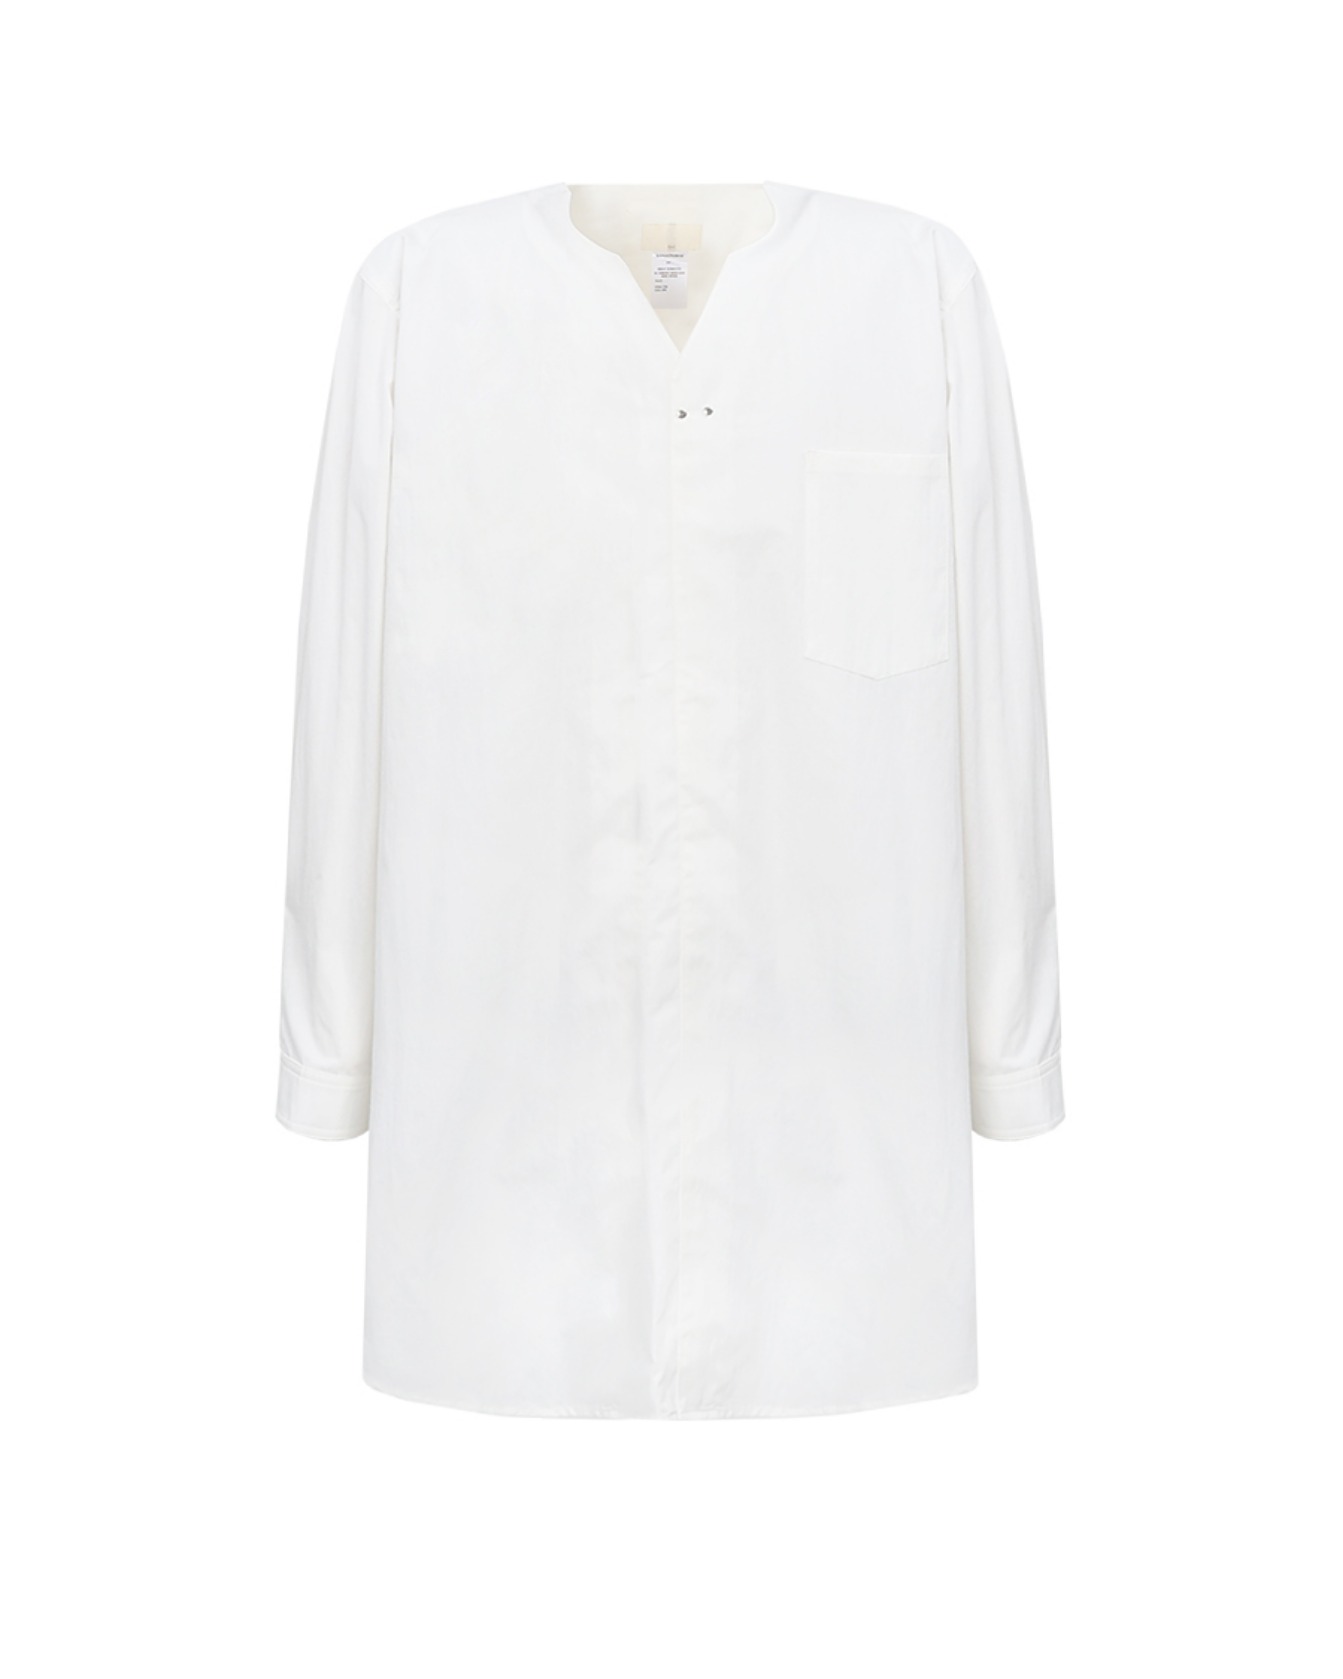 (In)    CRESCENT MOON LONG SHIRT  (WHITE)